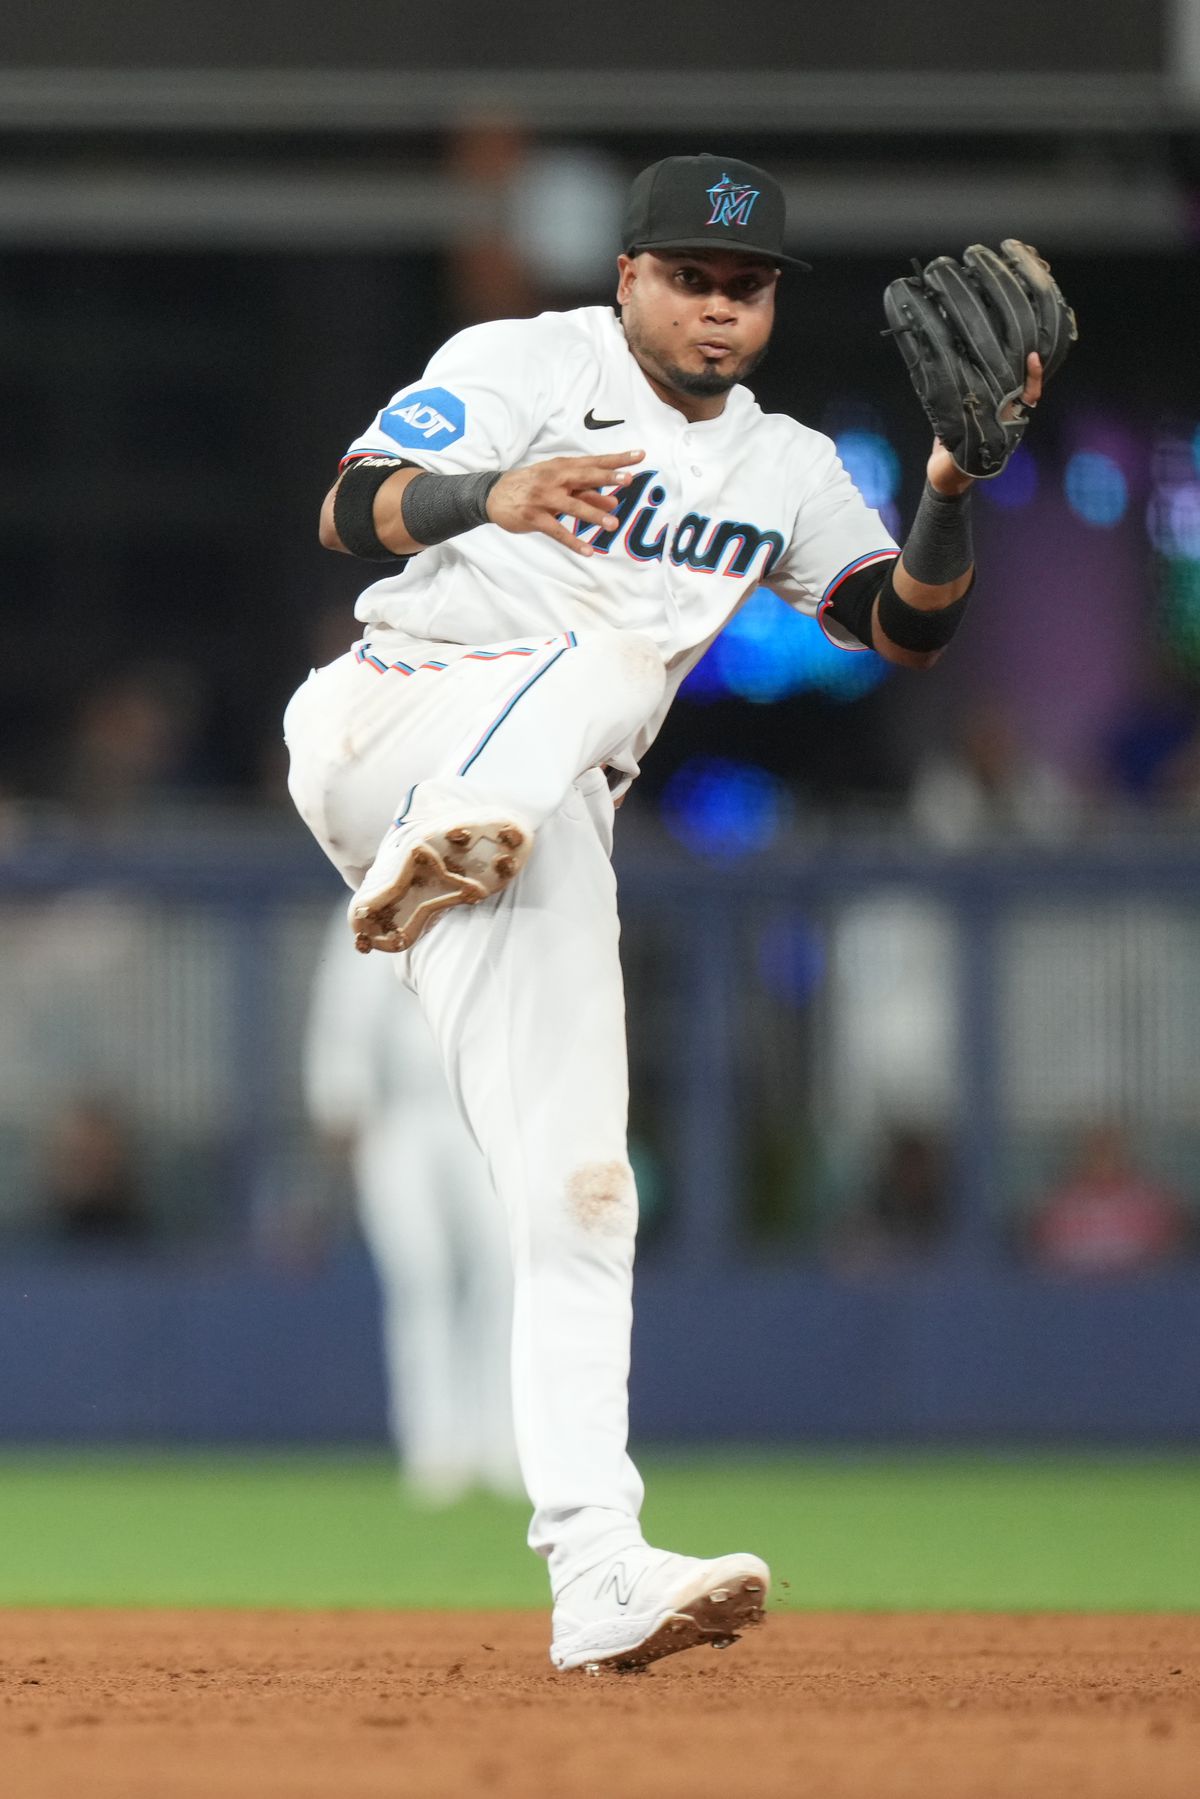 Miami Marlins second baseman Luis Arraez (3) makes an off balance throw to first base during the game between the Atlanta Braves and the Miami Marlins on Tuesday, May 2, 2023 at LoanDepot Park in Miami, Fla.